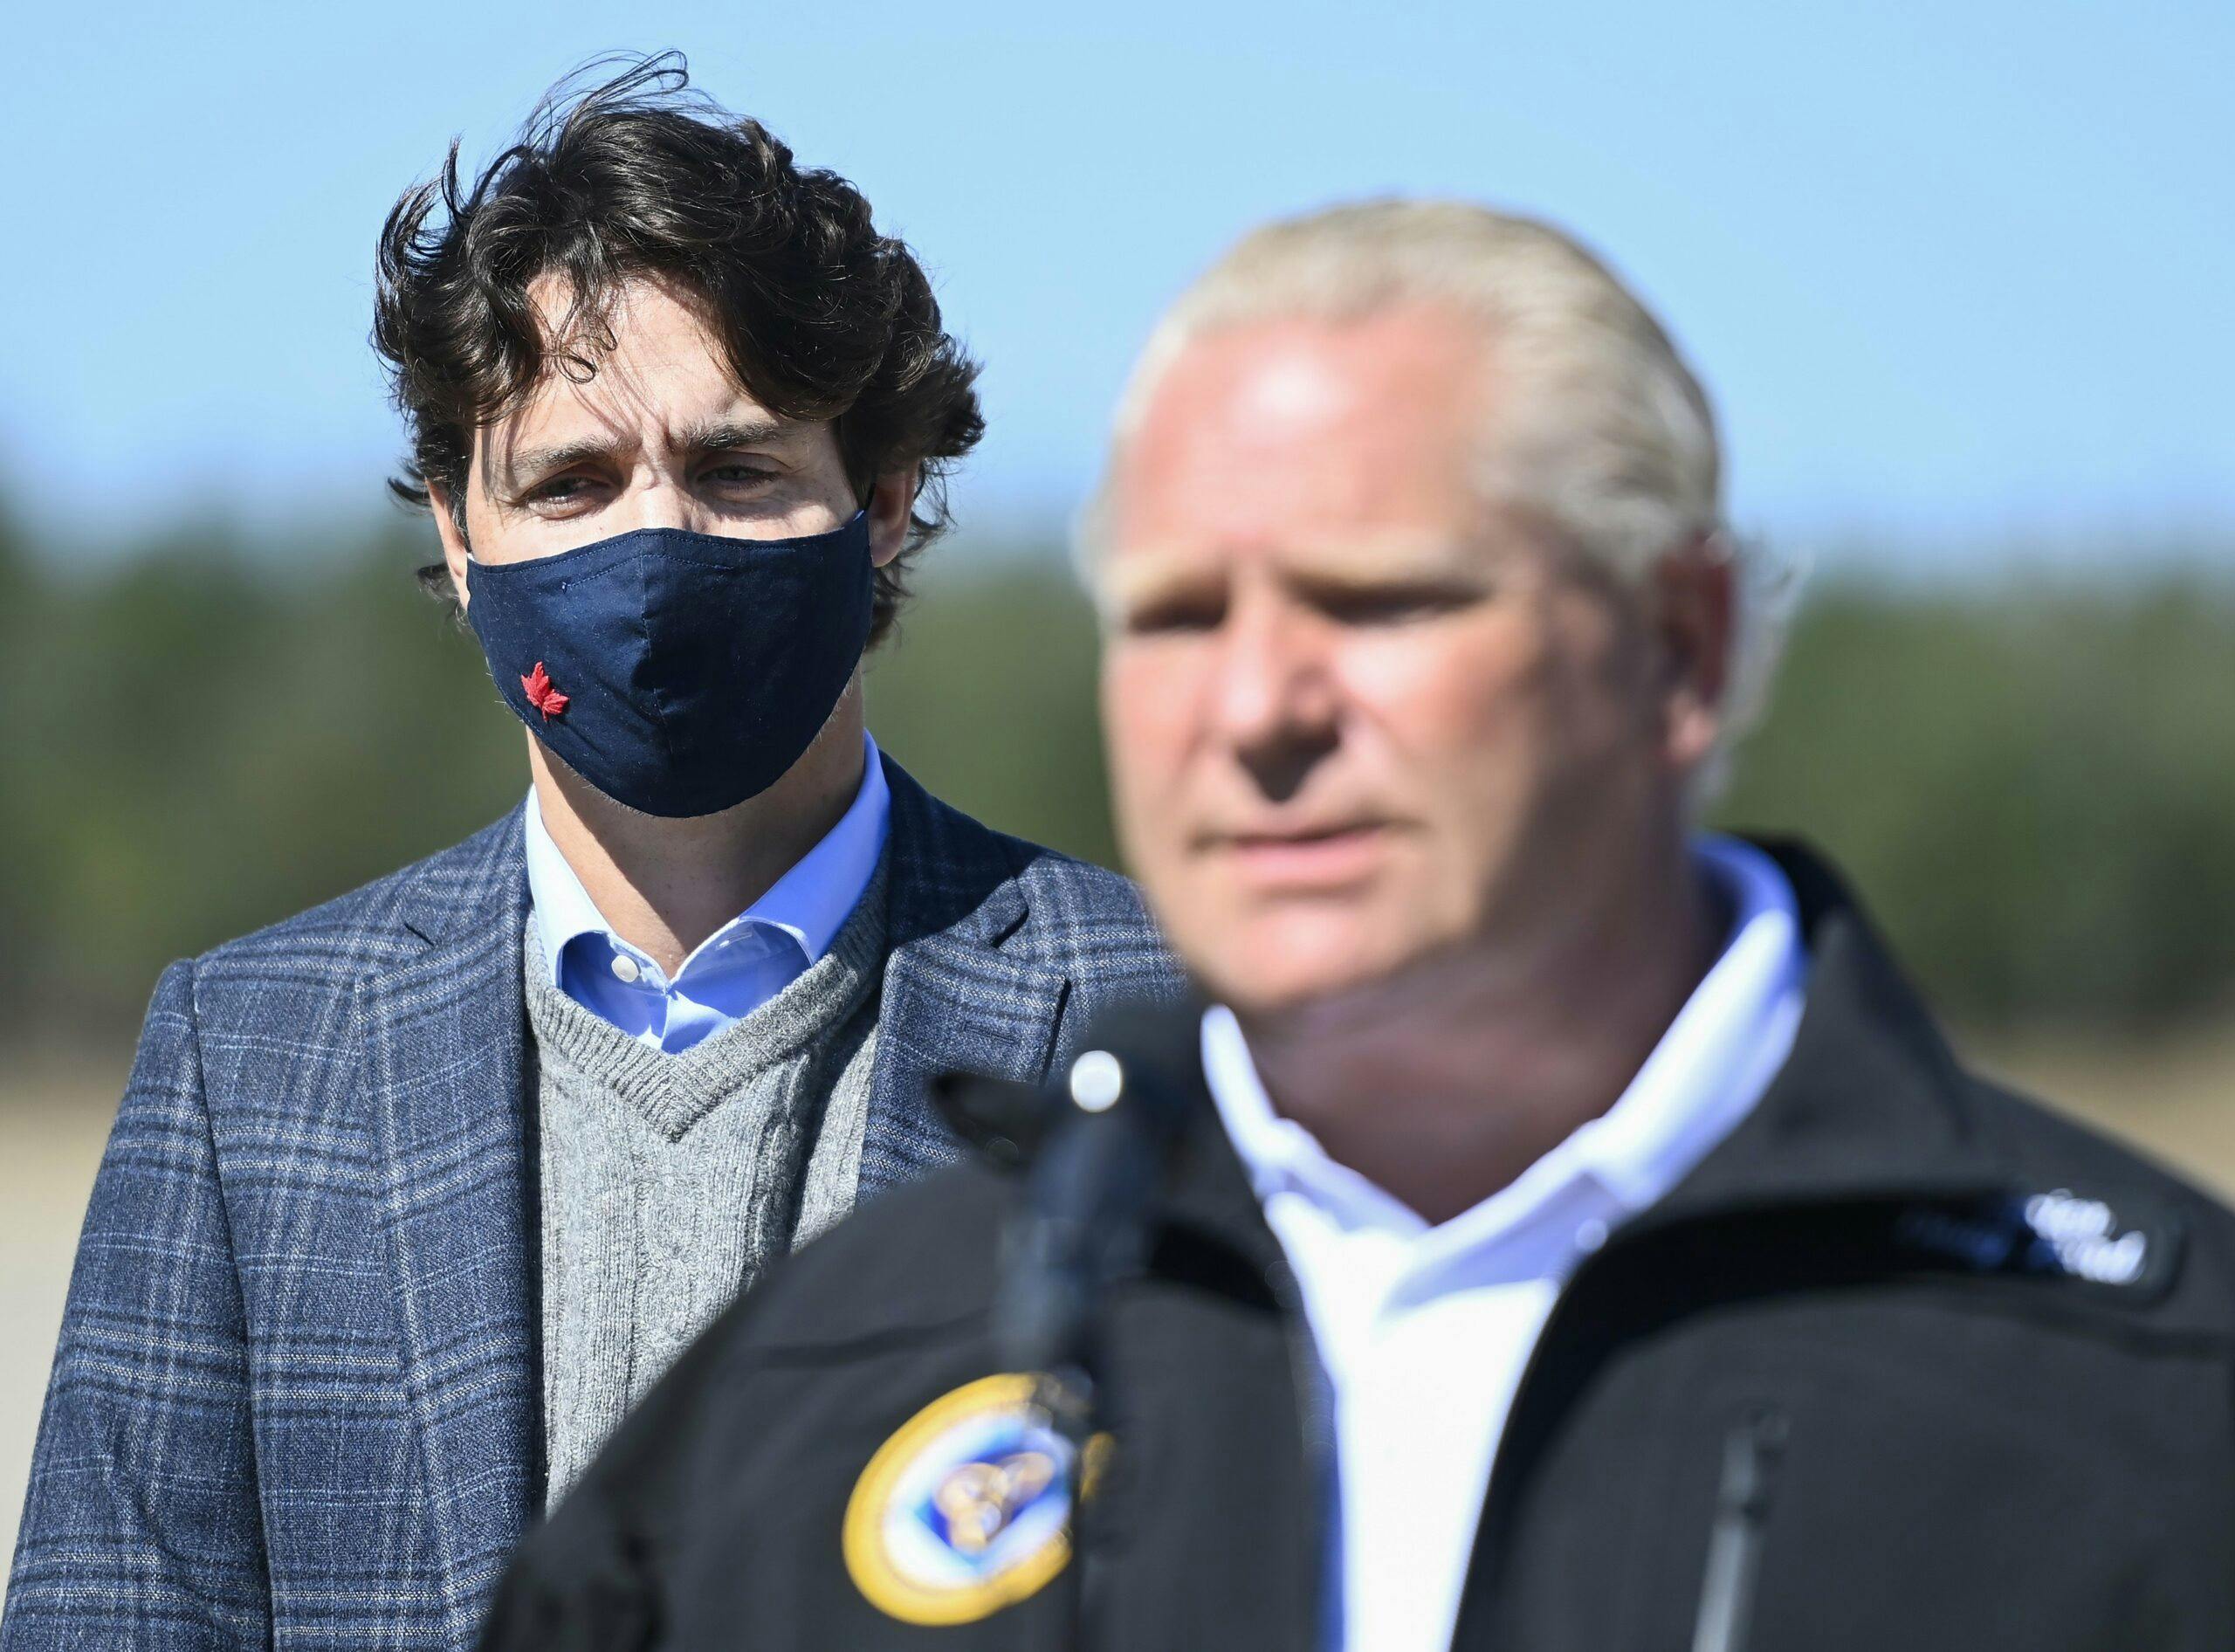 Trudeau blasted Ford for ‘hiding from his responsibility’ to deal with Ottawa convoy